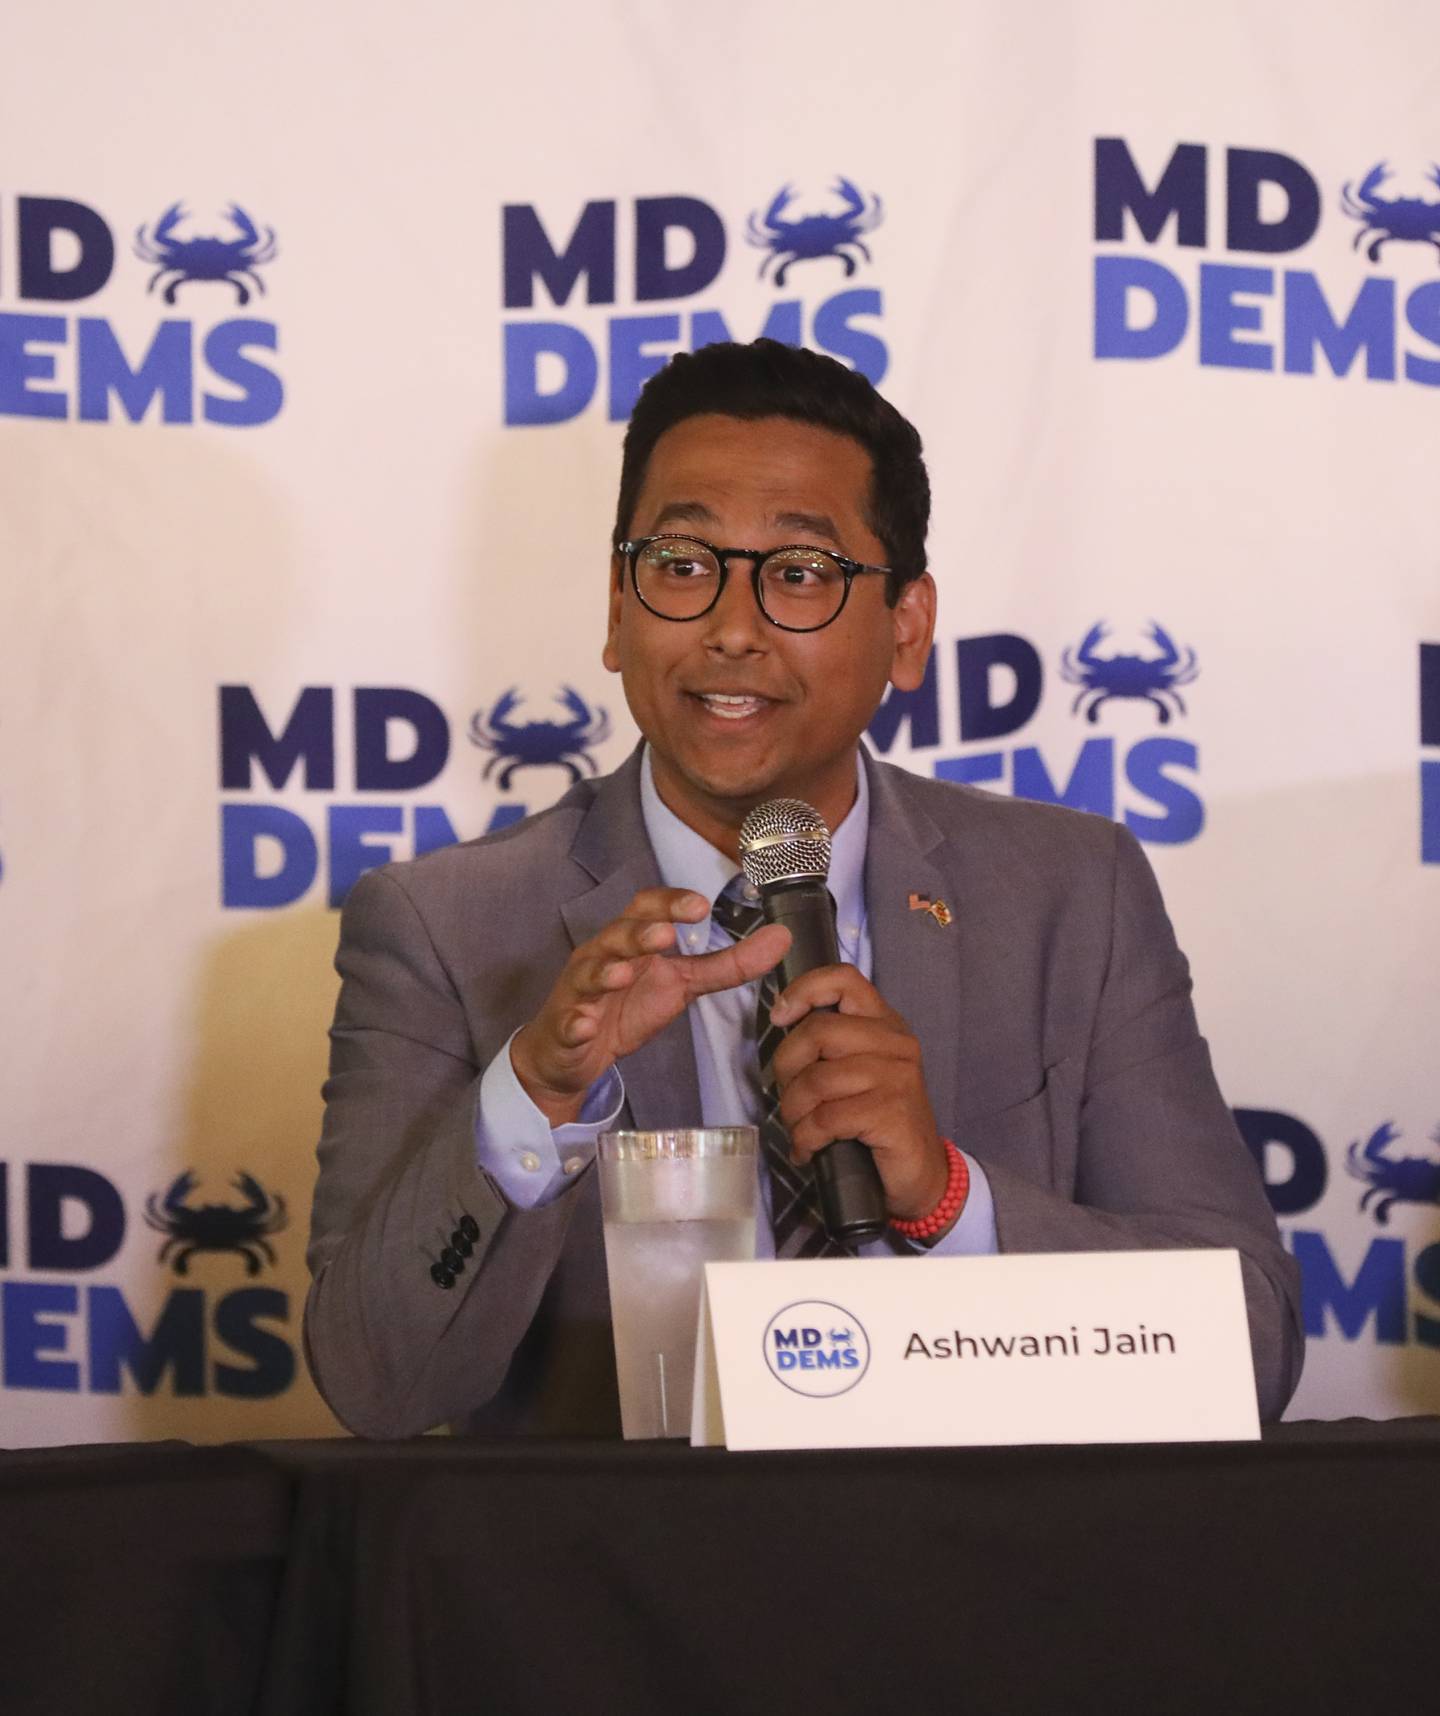 Gubernatorial candidate Ashwani Jain speaks during a candidates forum on healthcare issues sponsored by the Maryland Democratic Party at BC Brewery on May 31, 2022. (Kaitlin Newman for The Baltimore Banner)